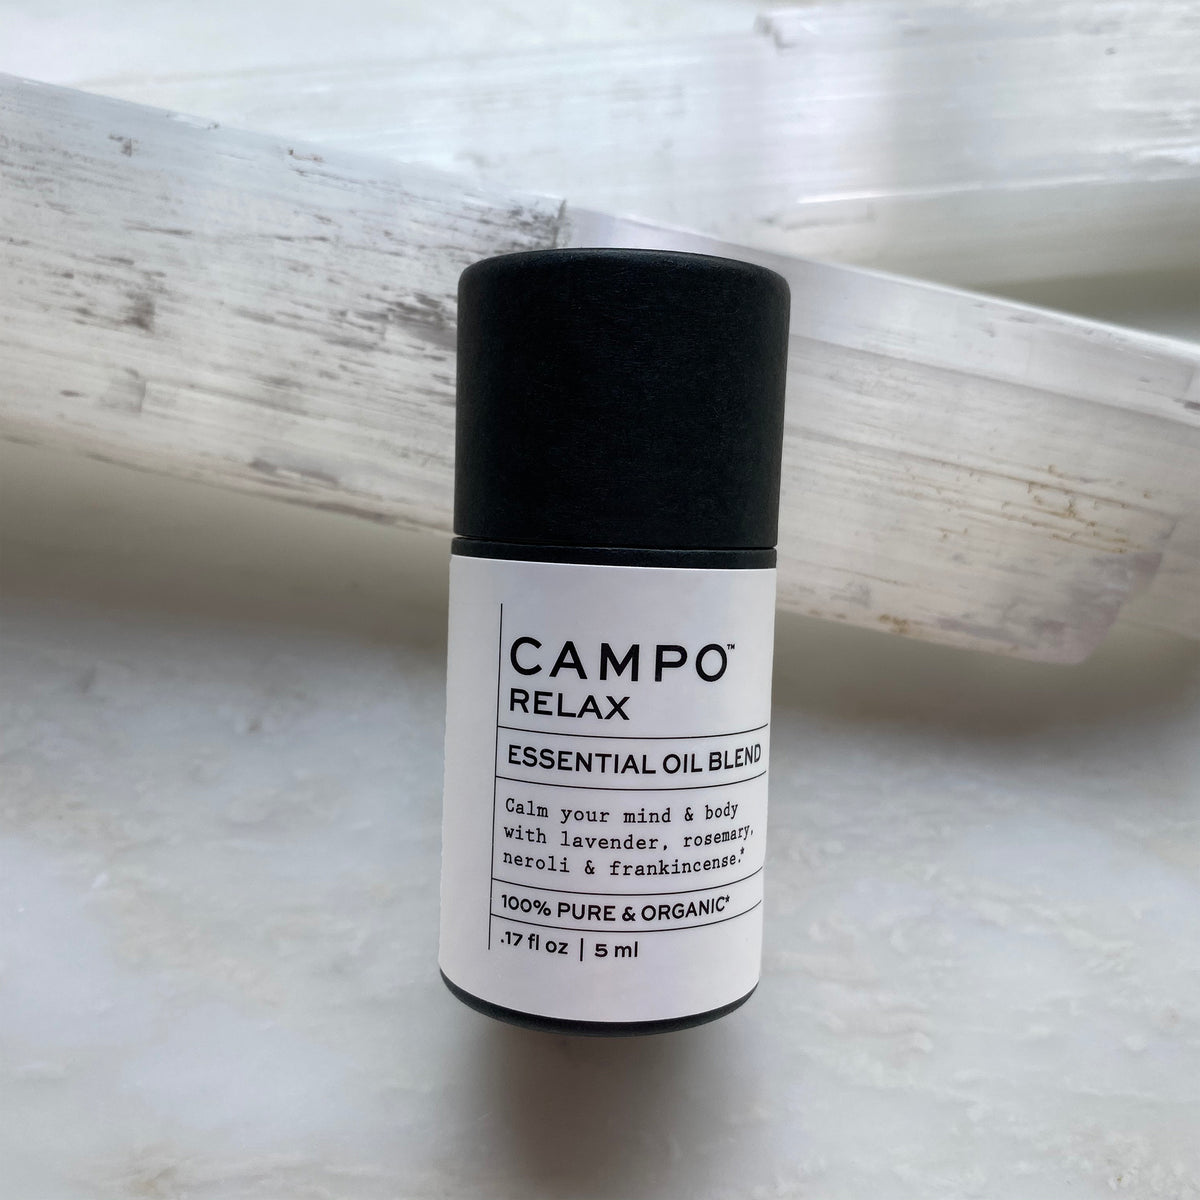 Campo Beauty RELAX Blend 5 ml Essential Oil. Dispels feelings of stress to promote deep relaxation. A calming blend of herbaceous floral notes of French Lavender, Rosemary, Frankincense, Italian Neroli Orange Blossom, Sweet Orange, and Bitter Orange.